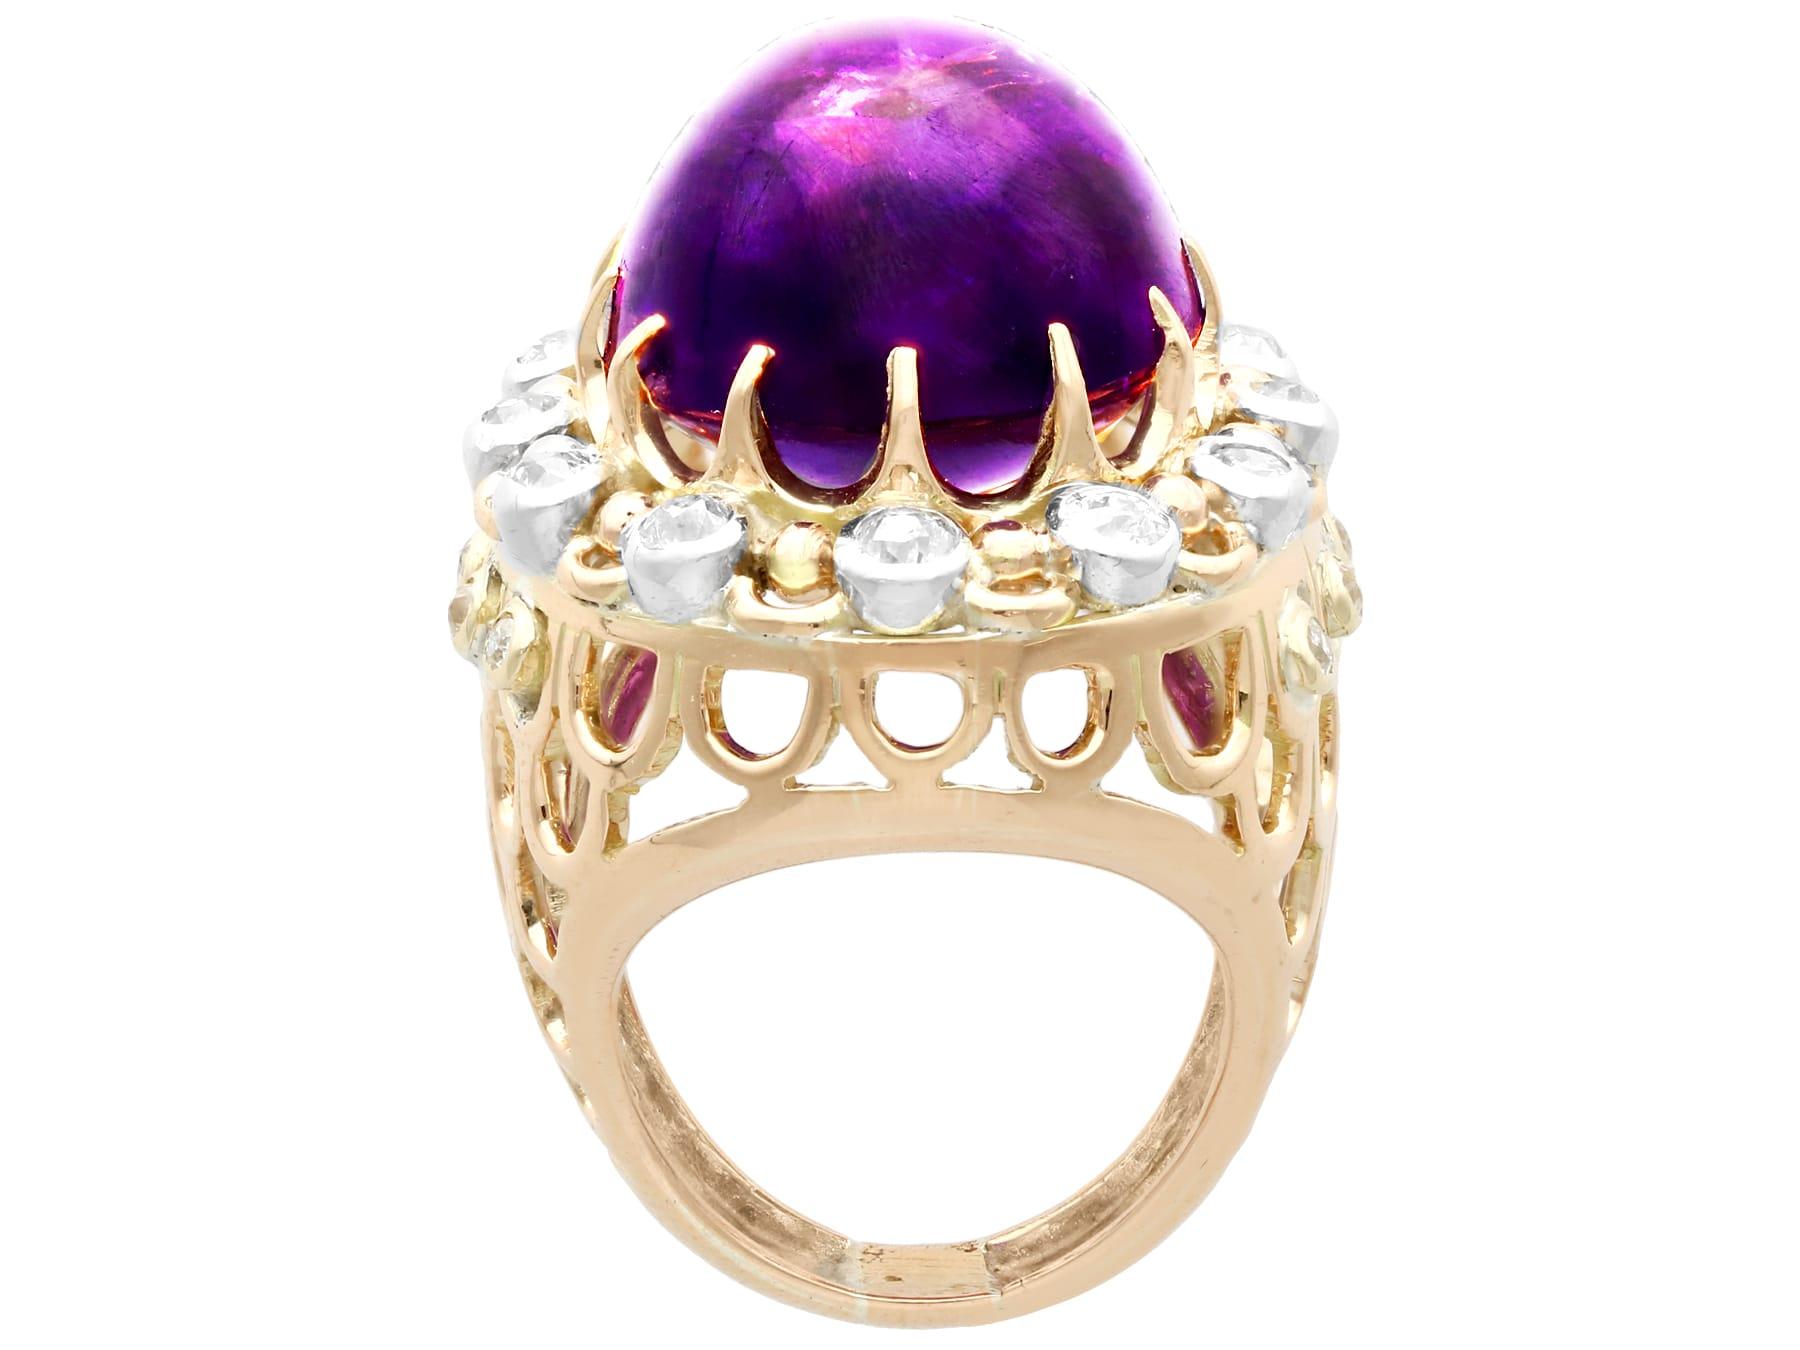 21.43 Carat Cabochon Cut Amethyst and 1.07 Carat Diamond Yellow Gold Ring For Sale 1